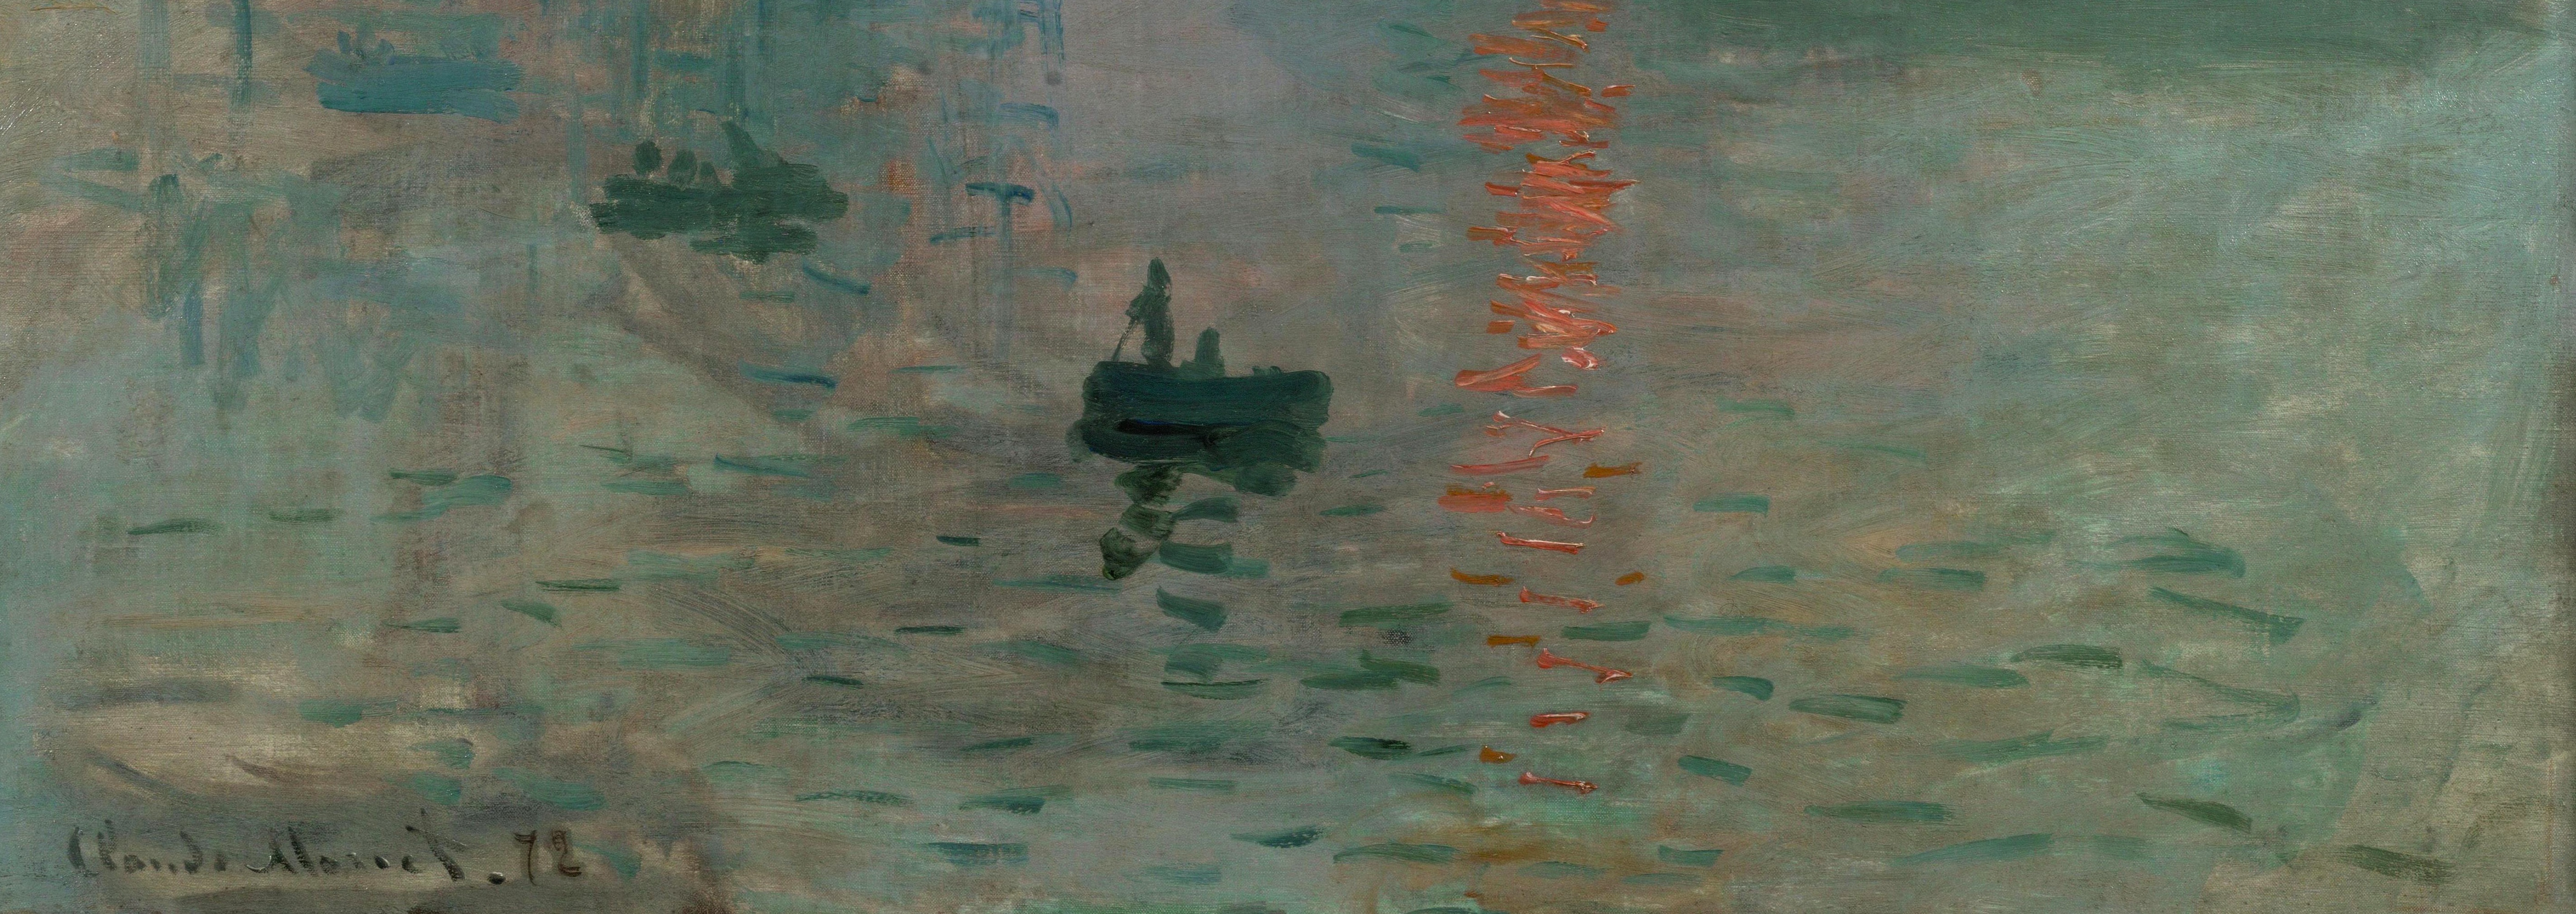 Impression, Sunrise by Claude Monet Closer Look and Analysis